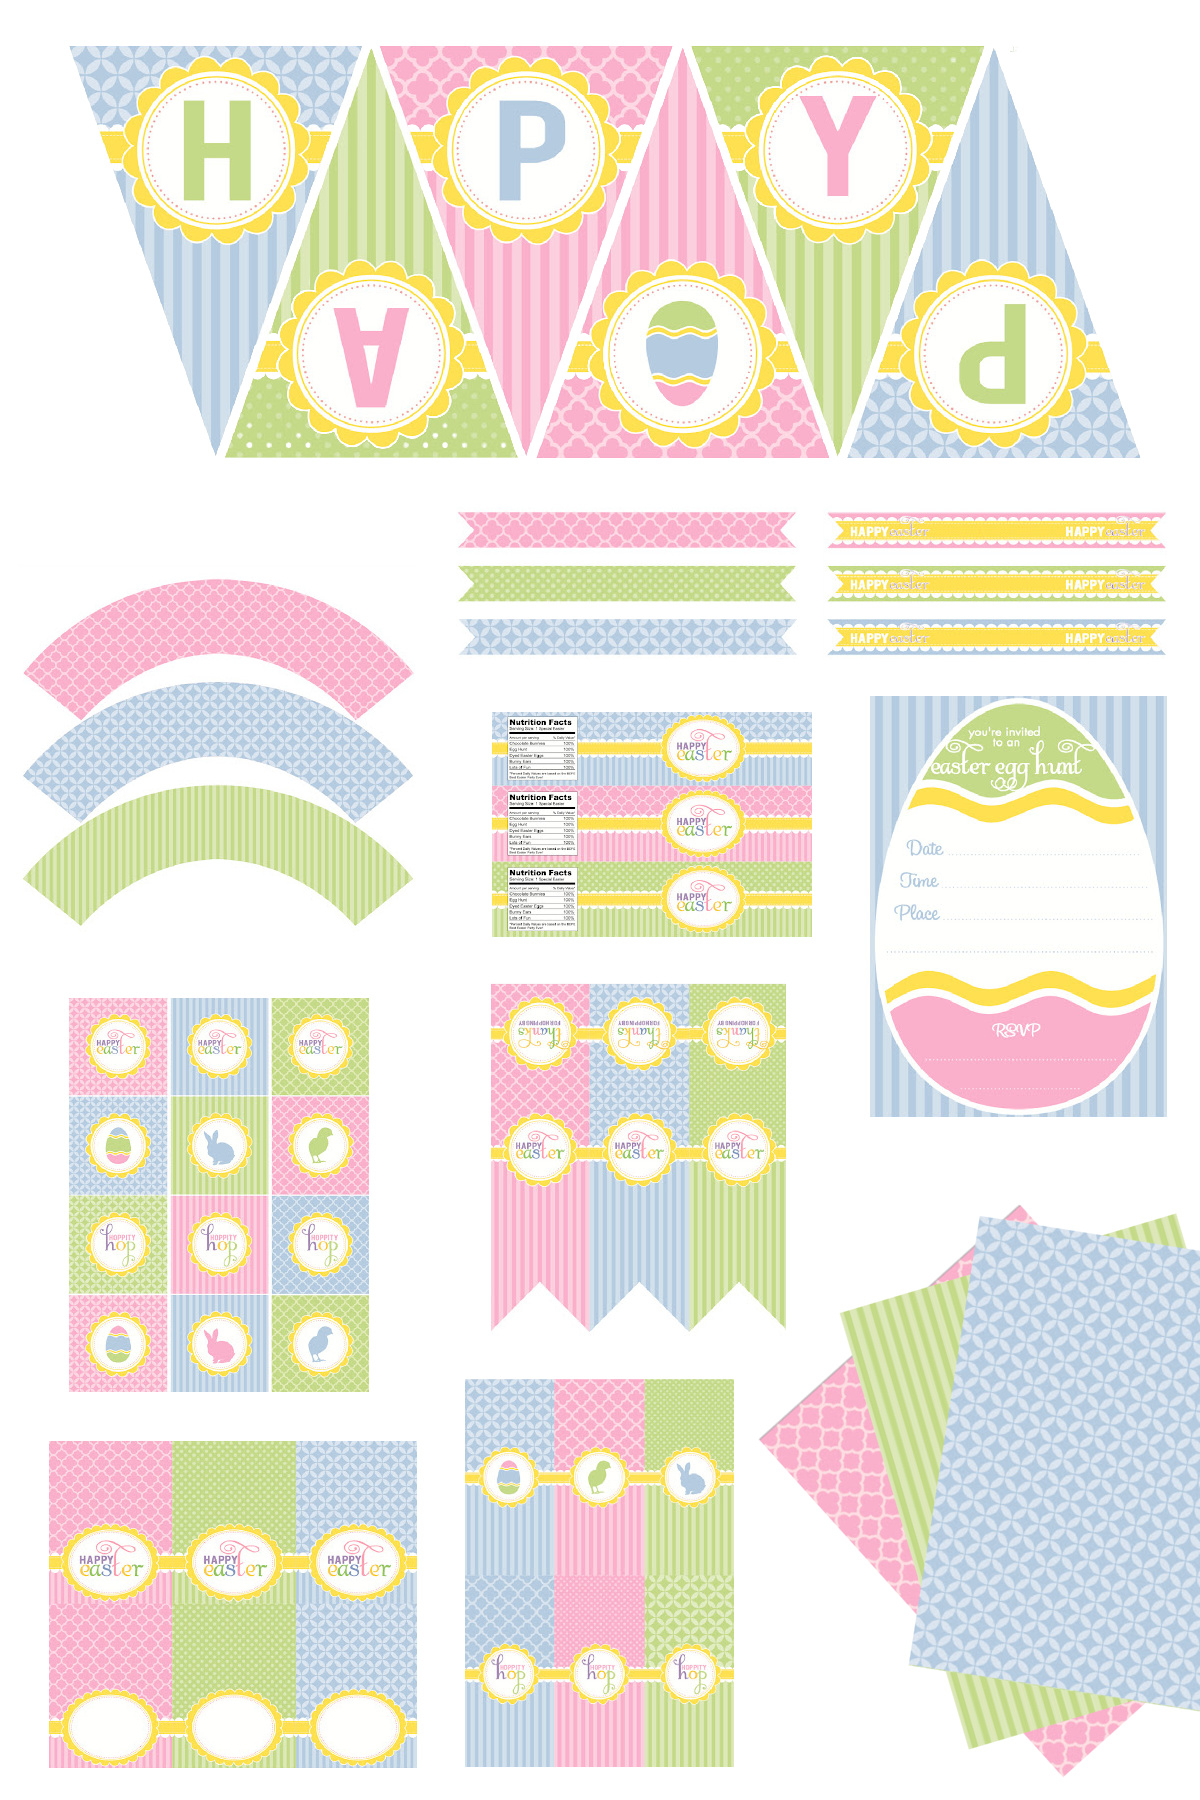 FREE Hoppity Hop Easter Party Printables